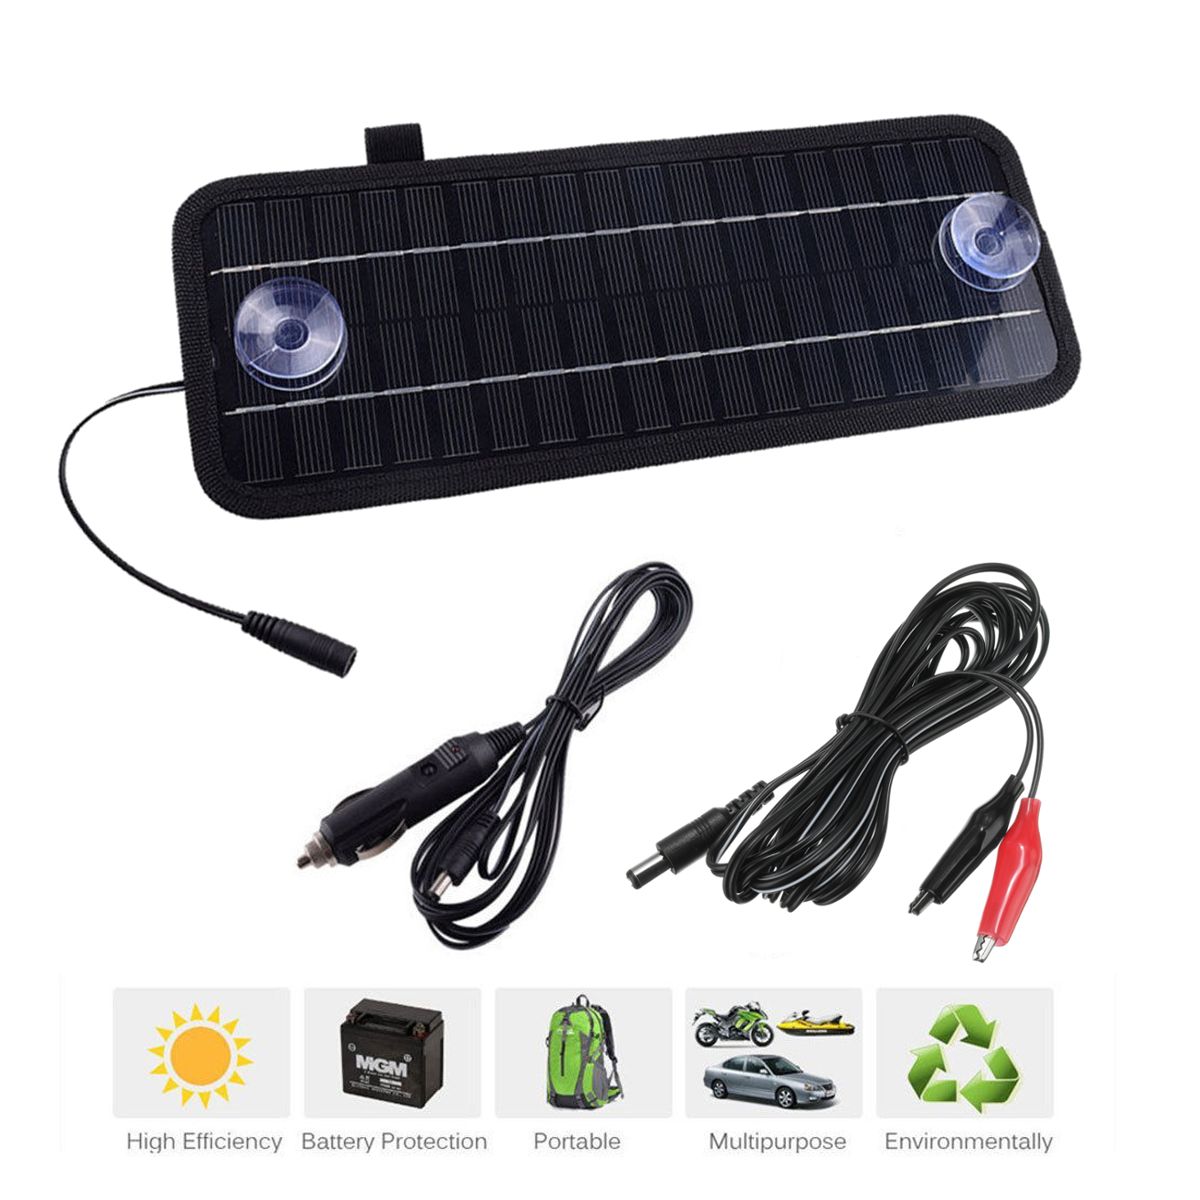 12V-45W-Portable-Solar-Panel-Power-Car-Boat-Battery-Charger-Backup-Outdoor-1133642